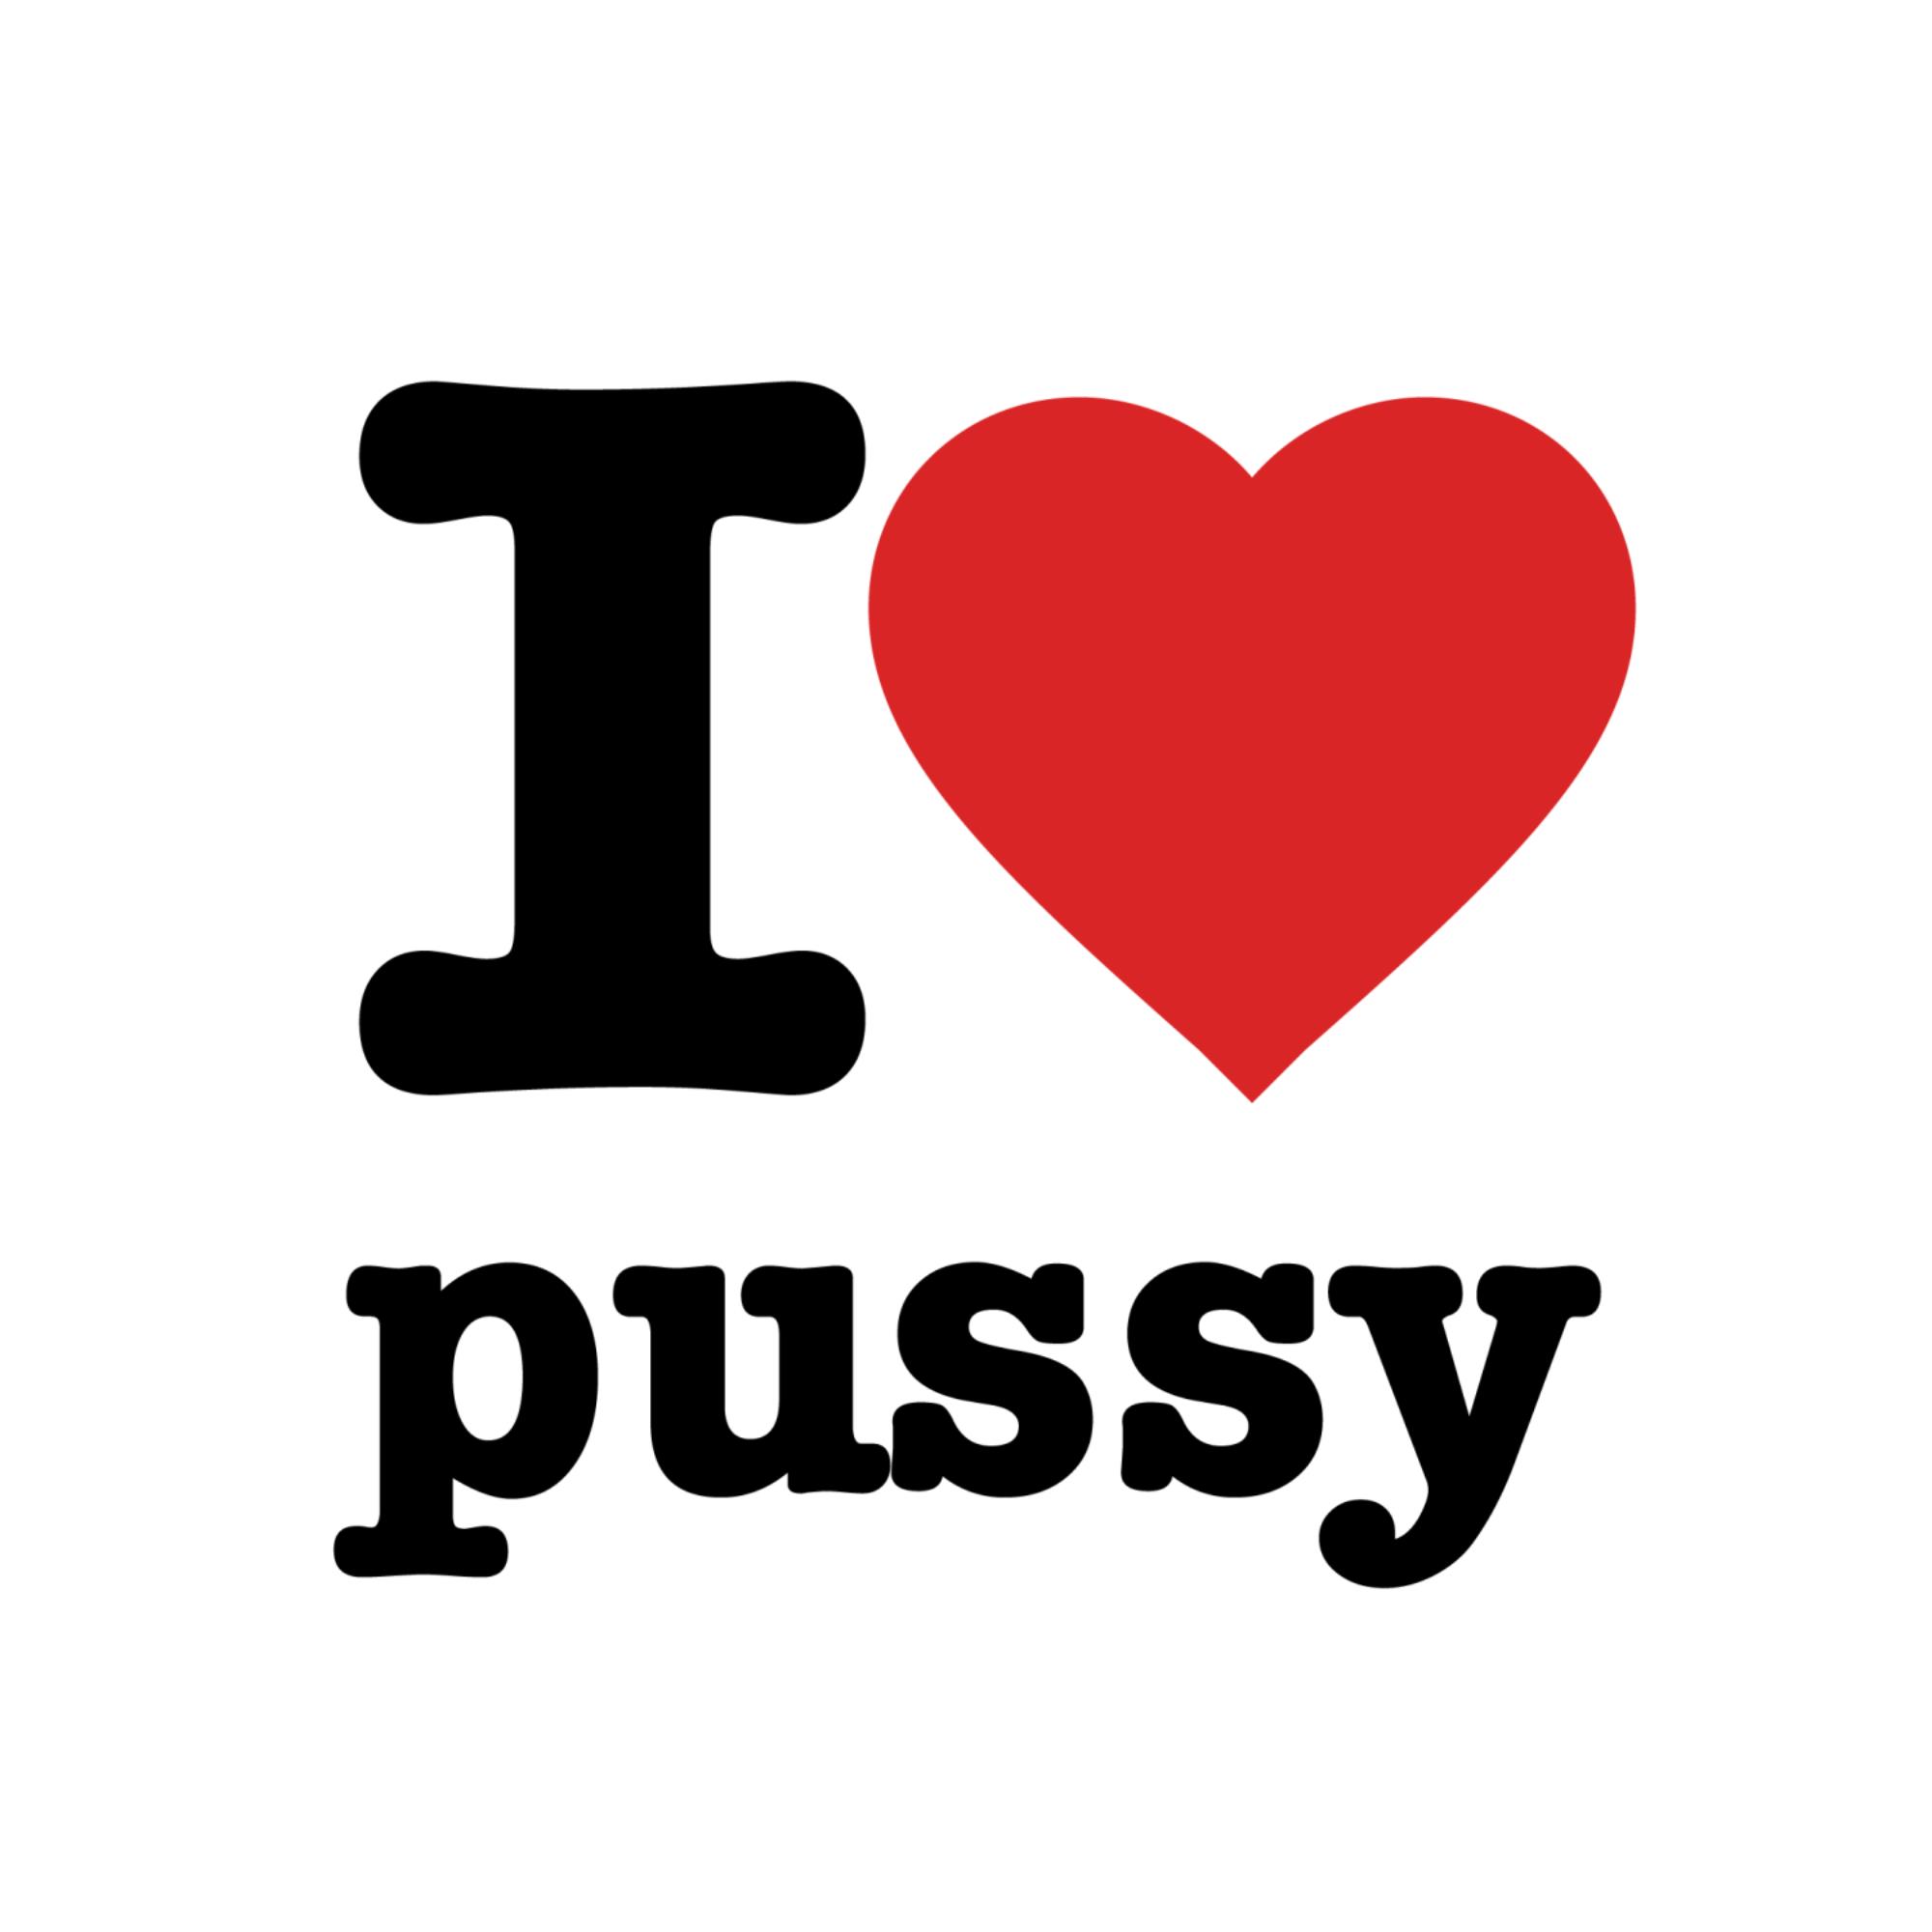 ashley cirelli recommends i love pussy pic